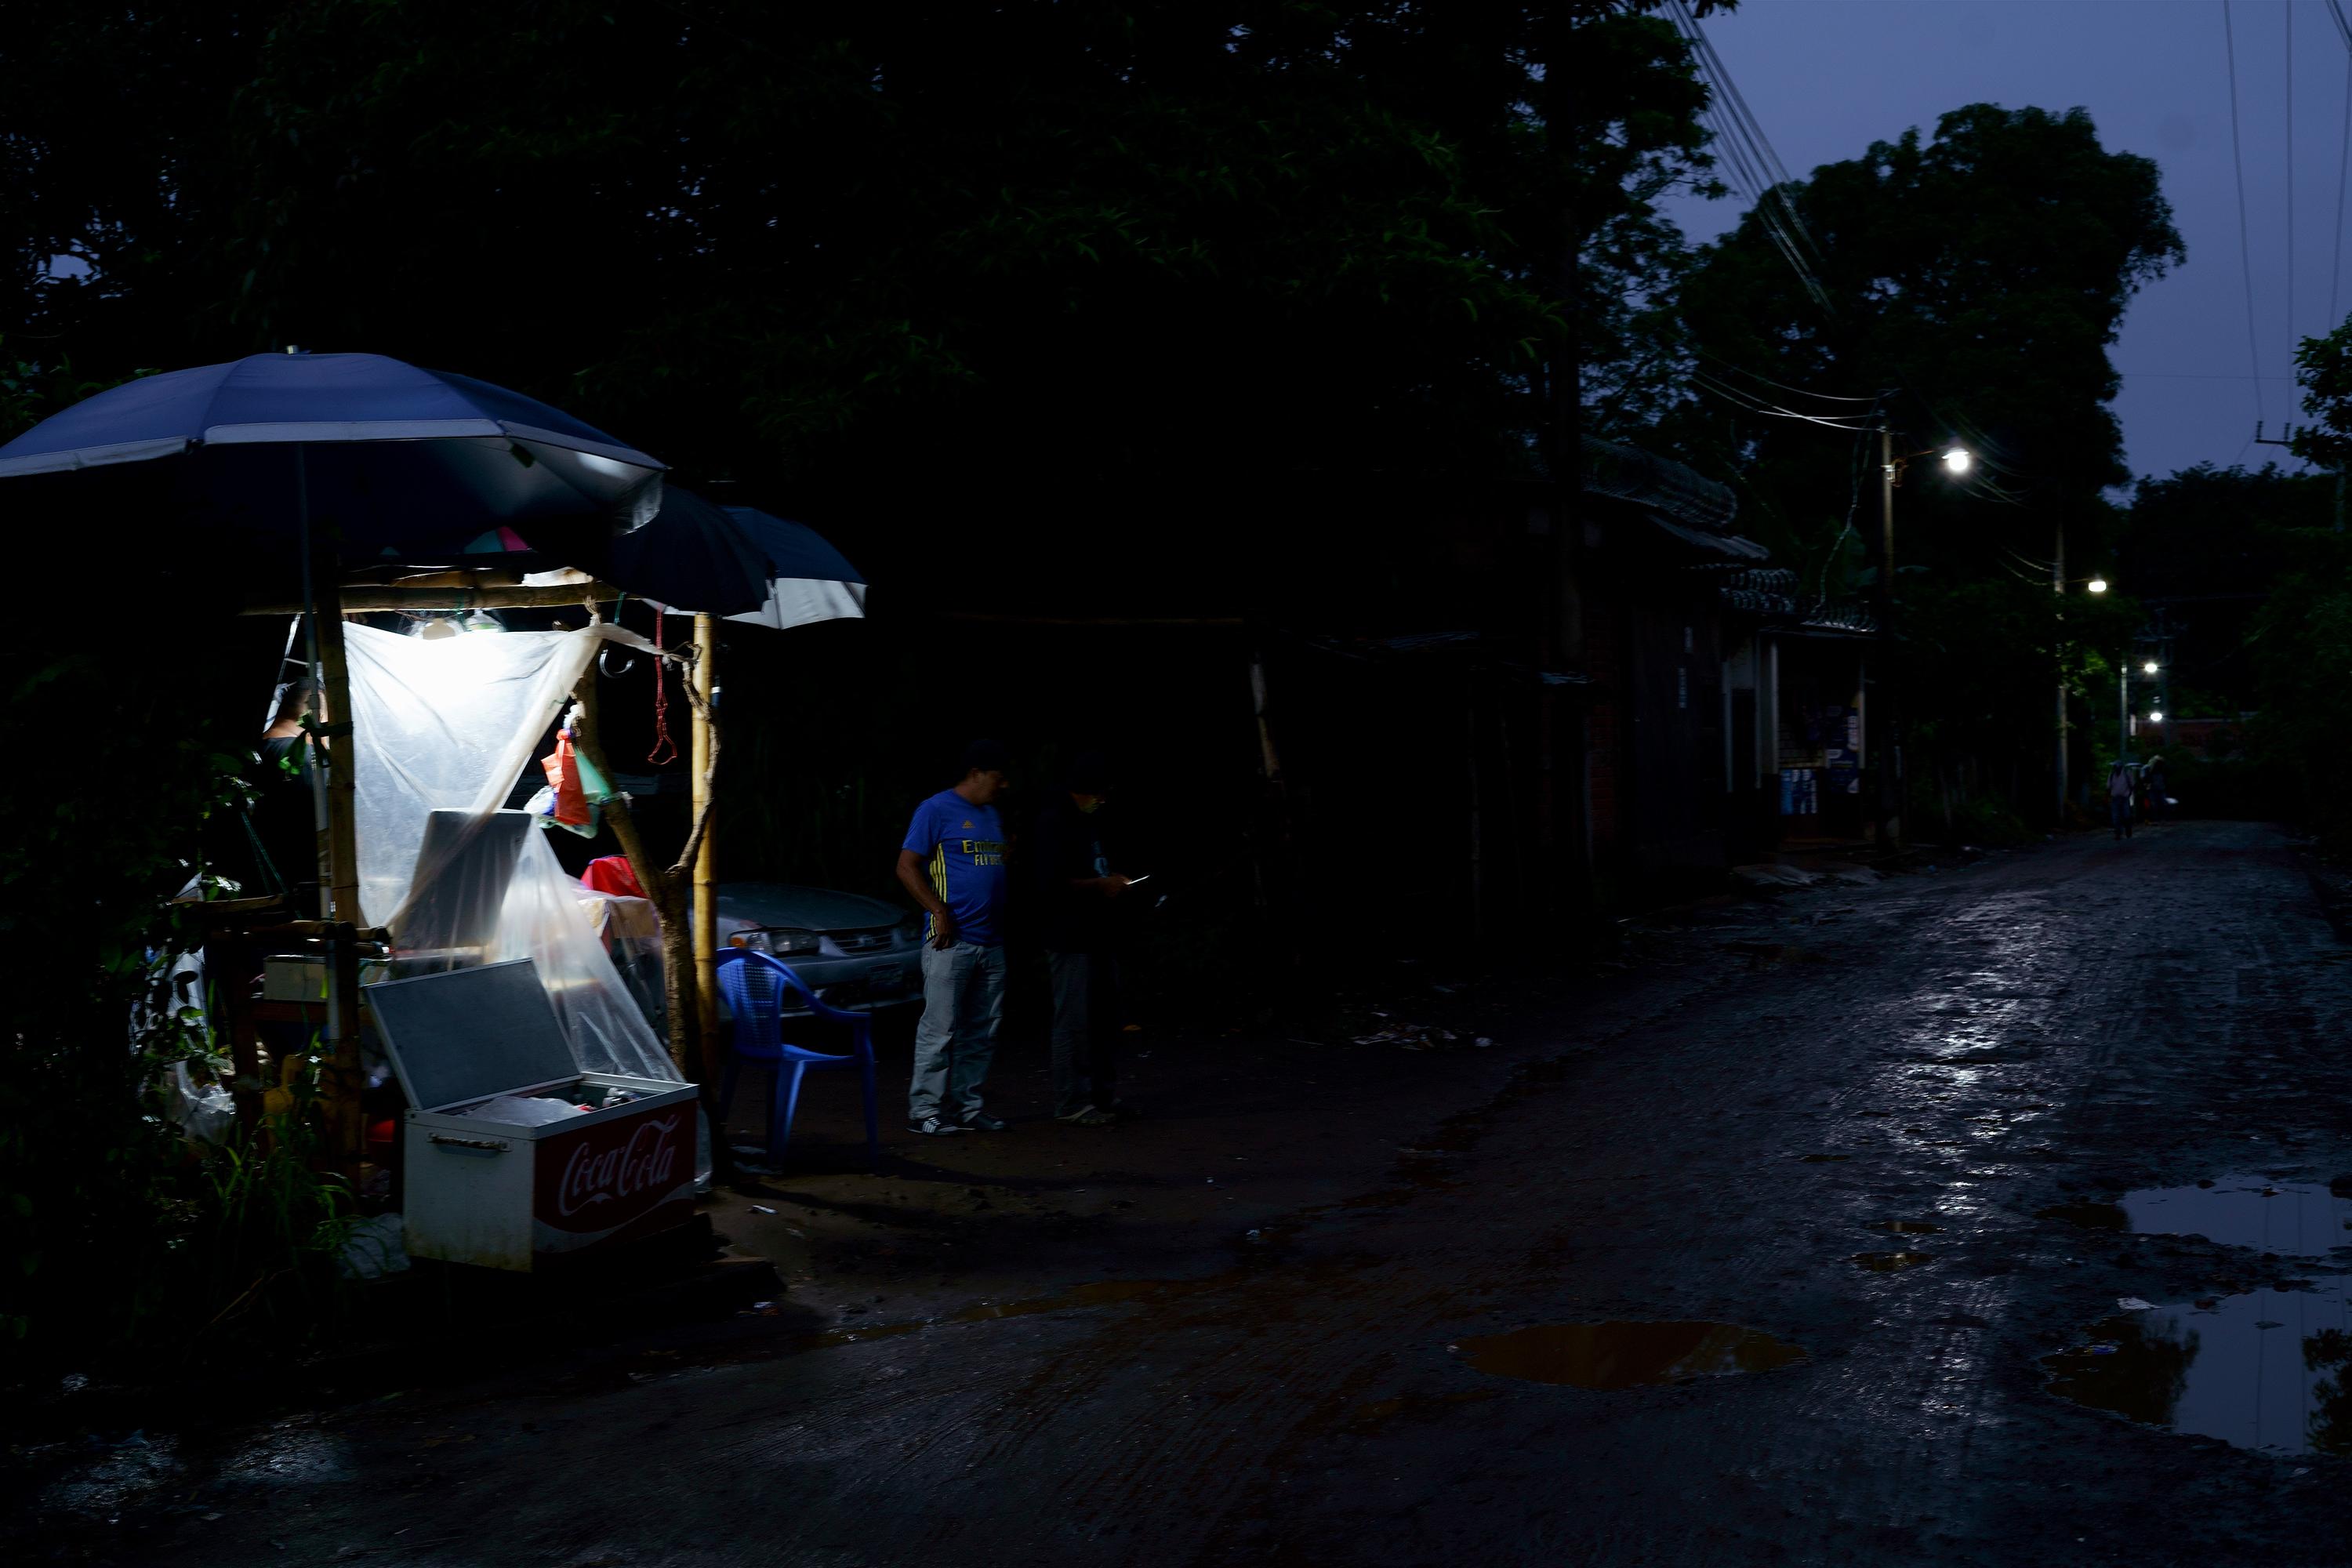 Every day, from dawn to dusk, residents who live near the prisons offer products and services to the families of those imprisoned under the state of exception. Cries of vendors fill the air, advertising their offerings: parking, bathrooms, snacks, pupusas, coffee, masks, and plastic bags to make packages for prisoners.